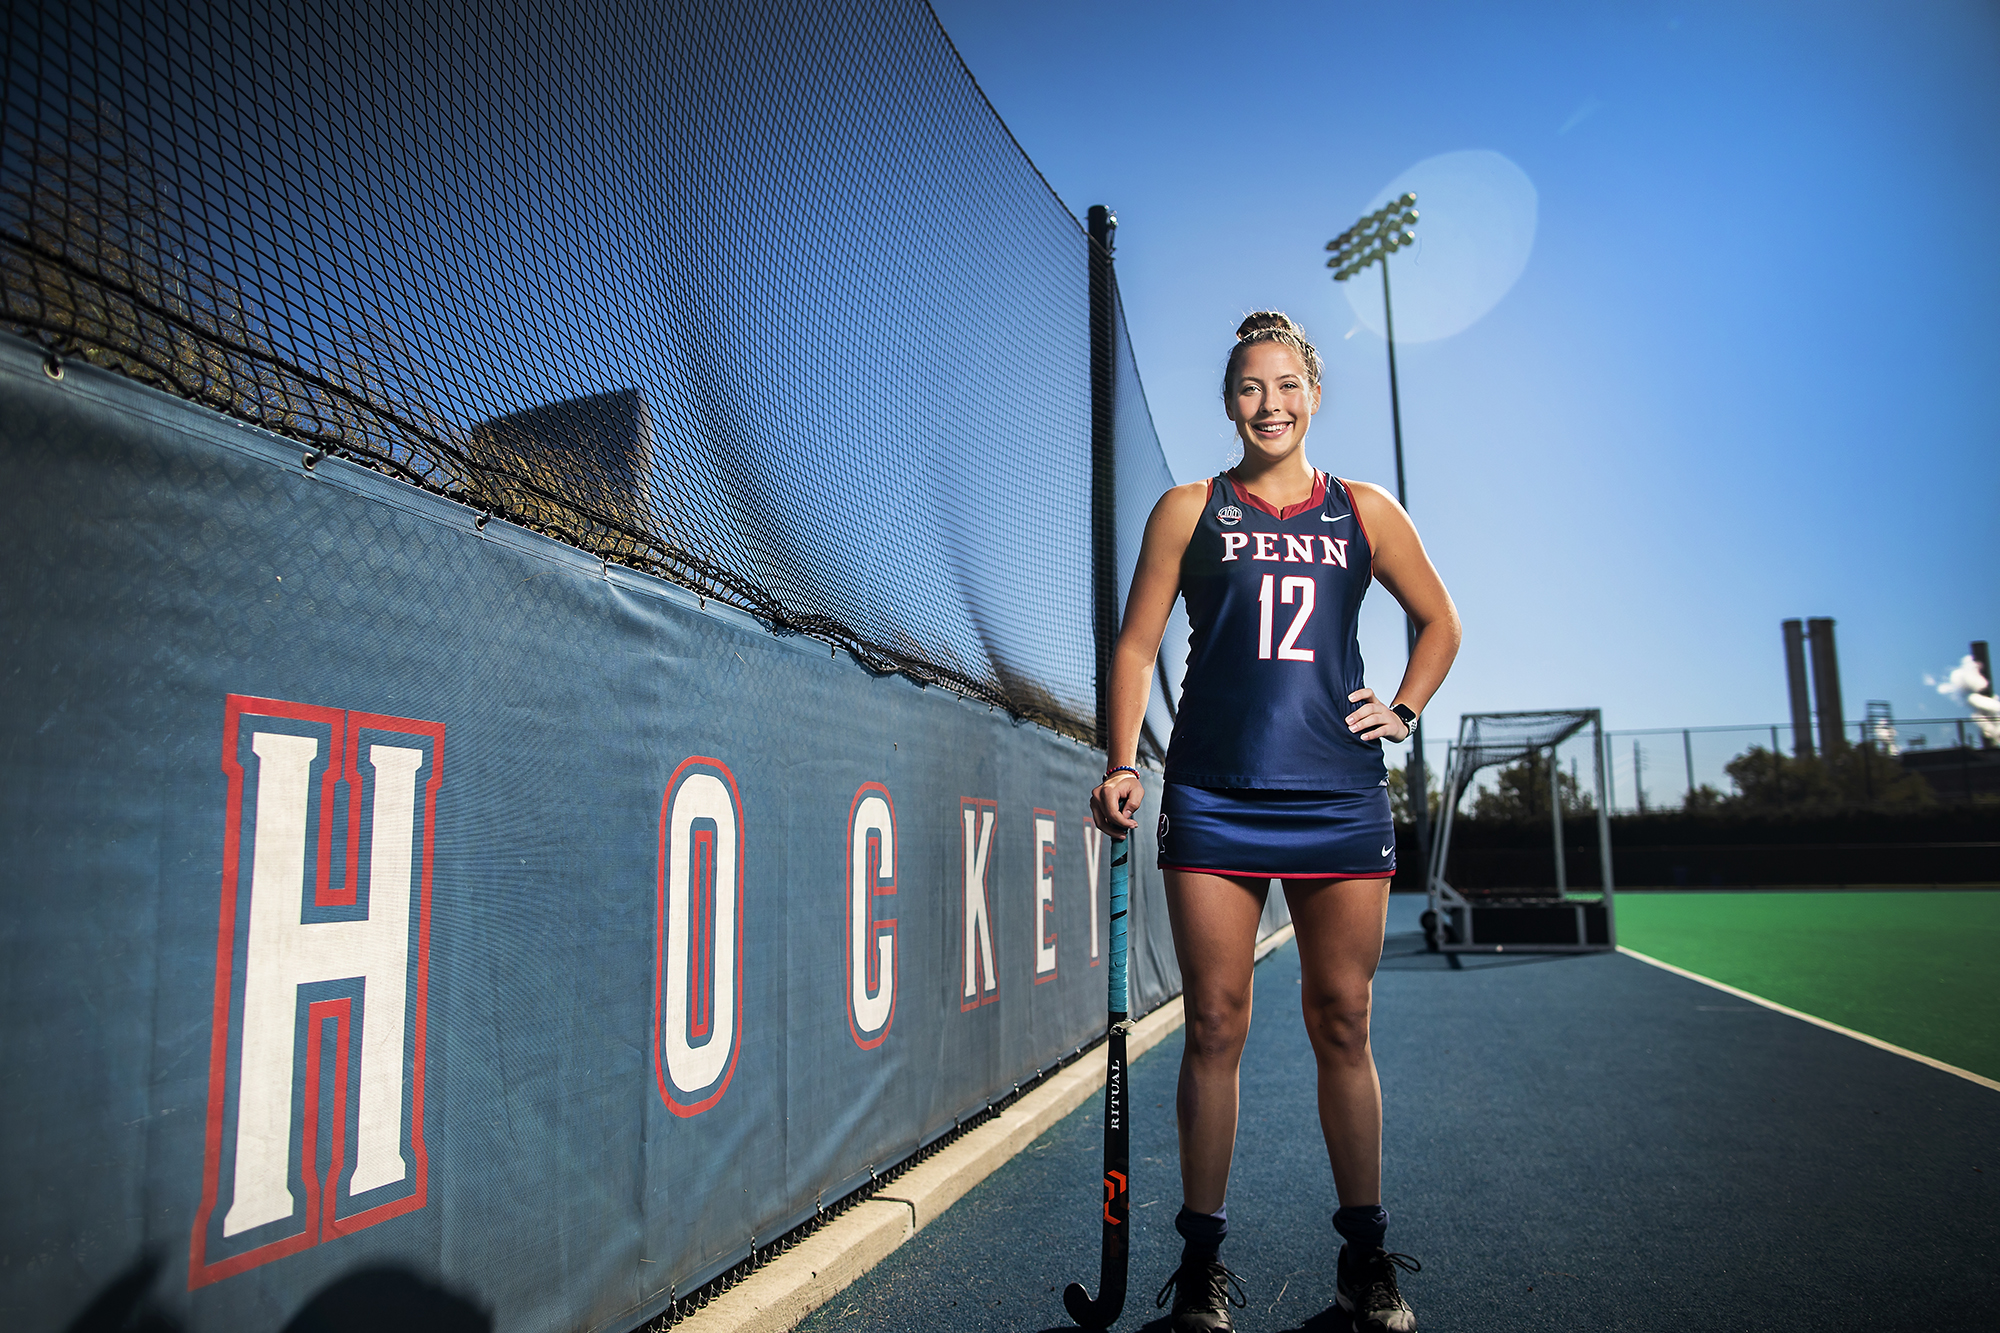 Banks smiles and holds her field hockey still while at Vagelos Field.